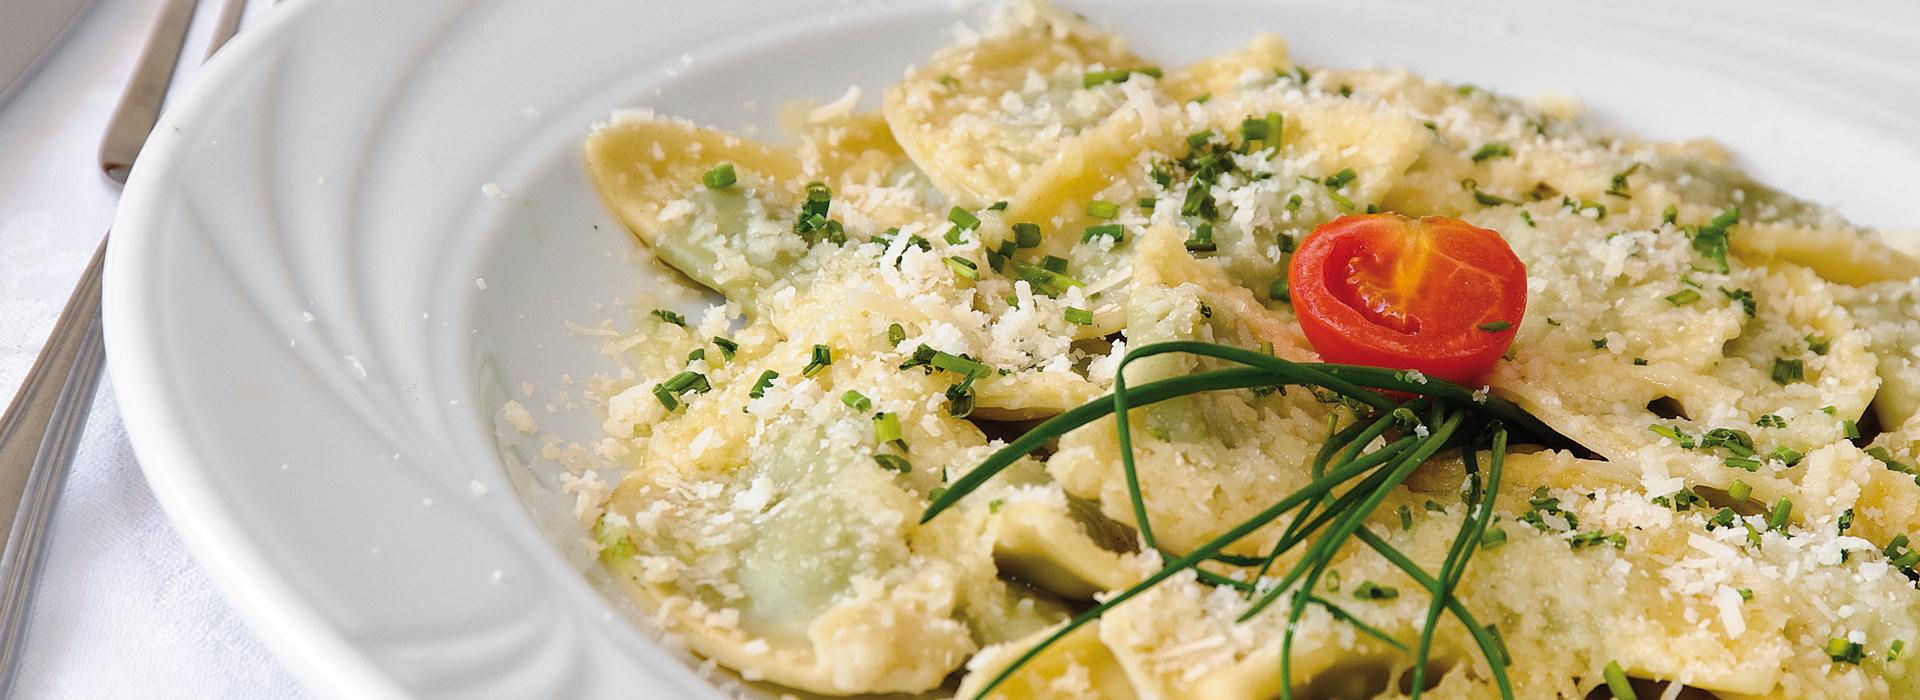 Schlutzkrapfen, a kind of South Tyrolean Ravioli filled with spinach